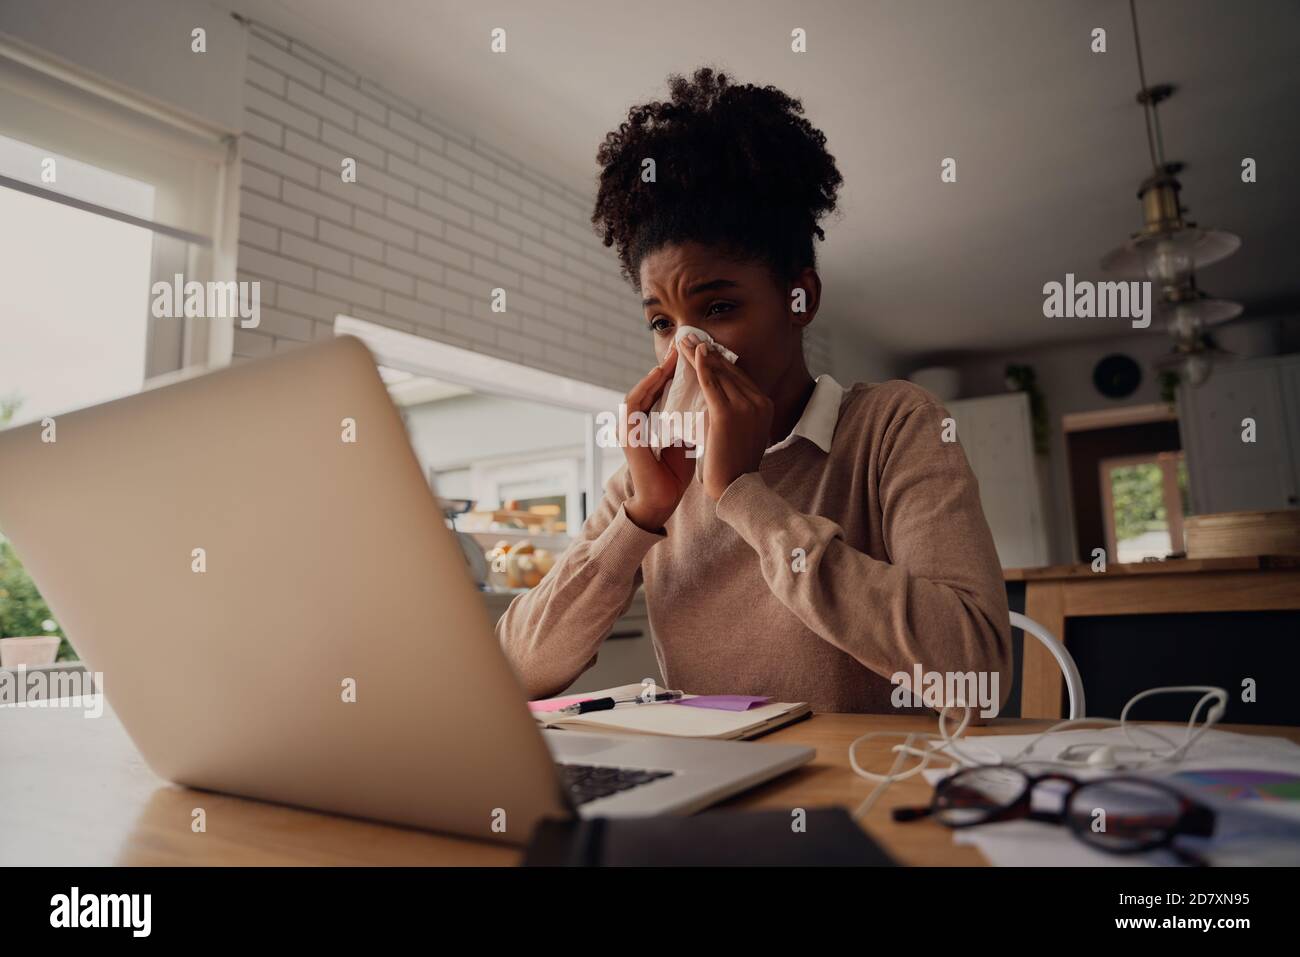 Sick woman working from home while blowing nose due to virus with cold and cough Stock Photo